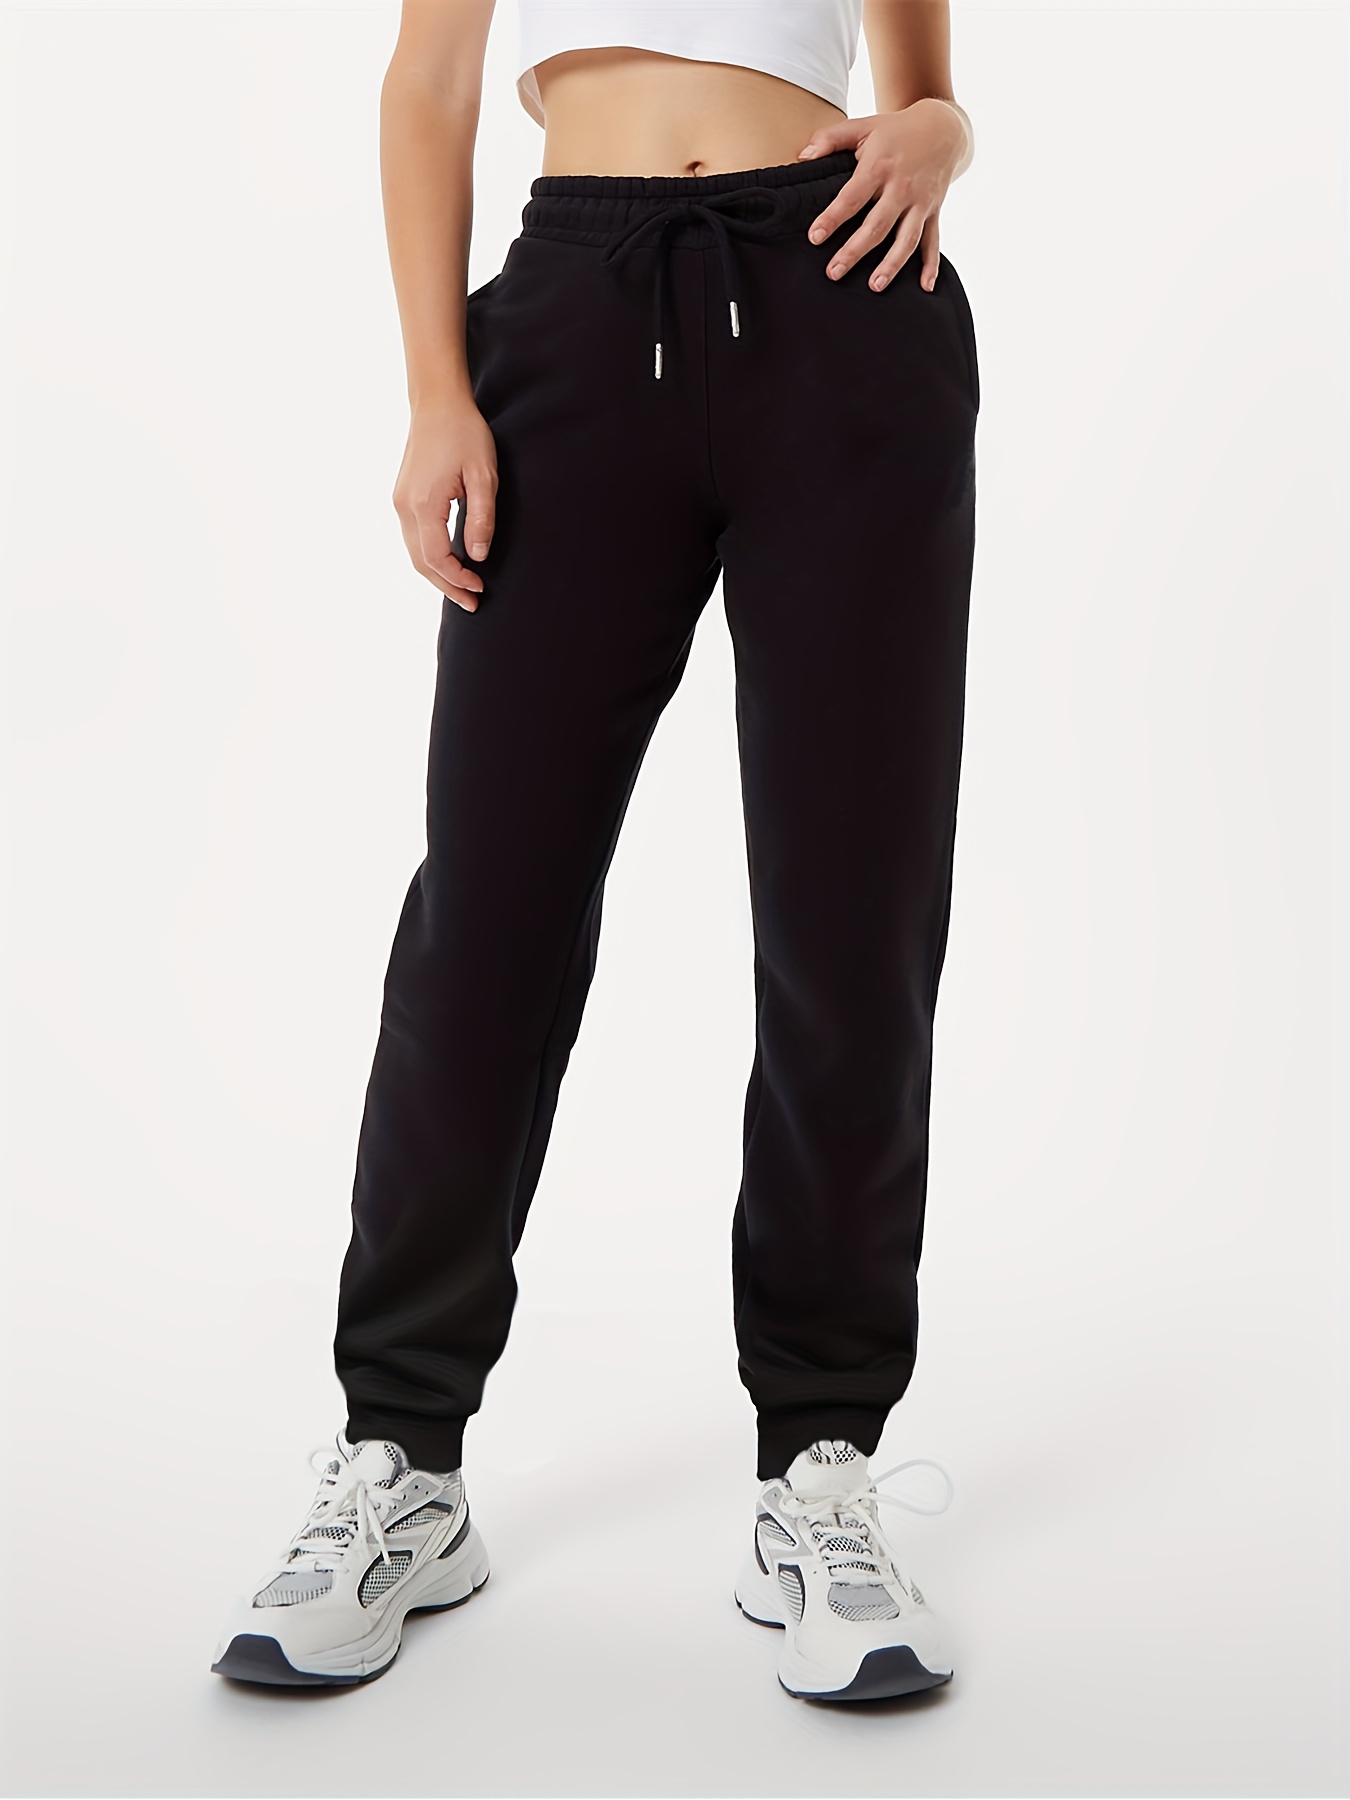 Solid Color Sports Pants, Elastic Waist Casual Running Jogging Sweatpants,  Women's Athleisure